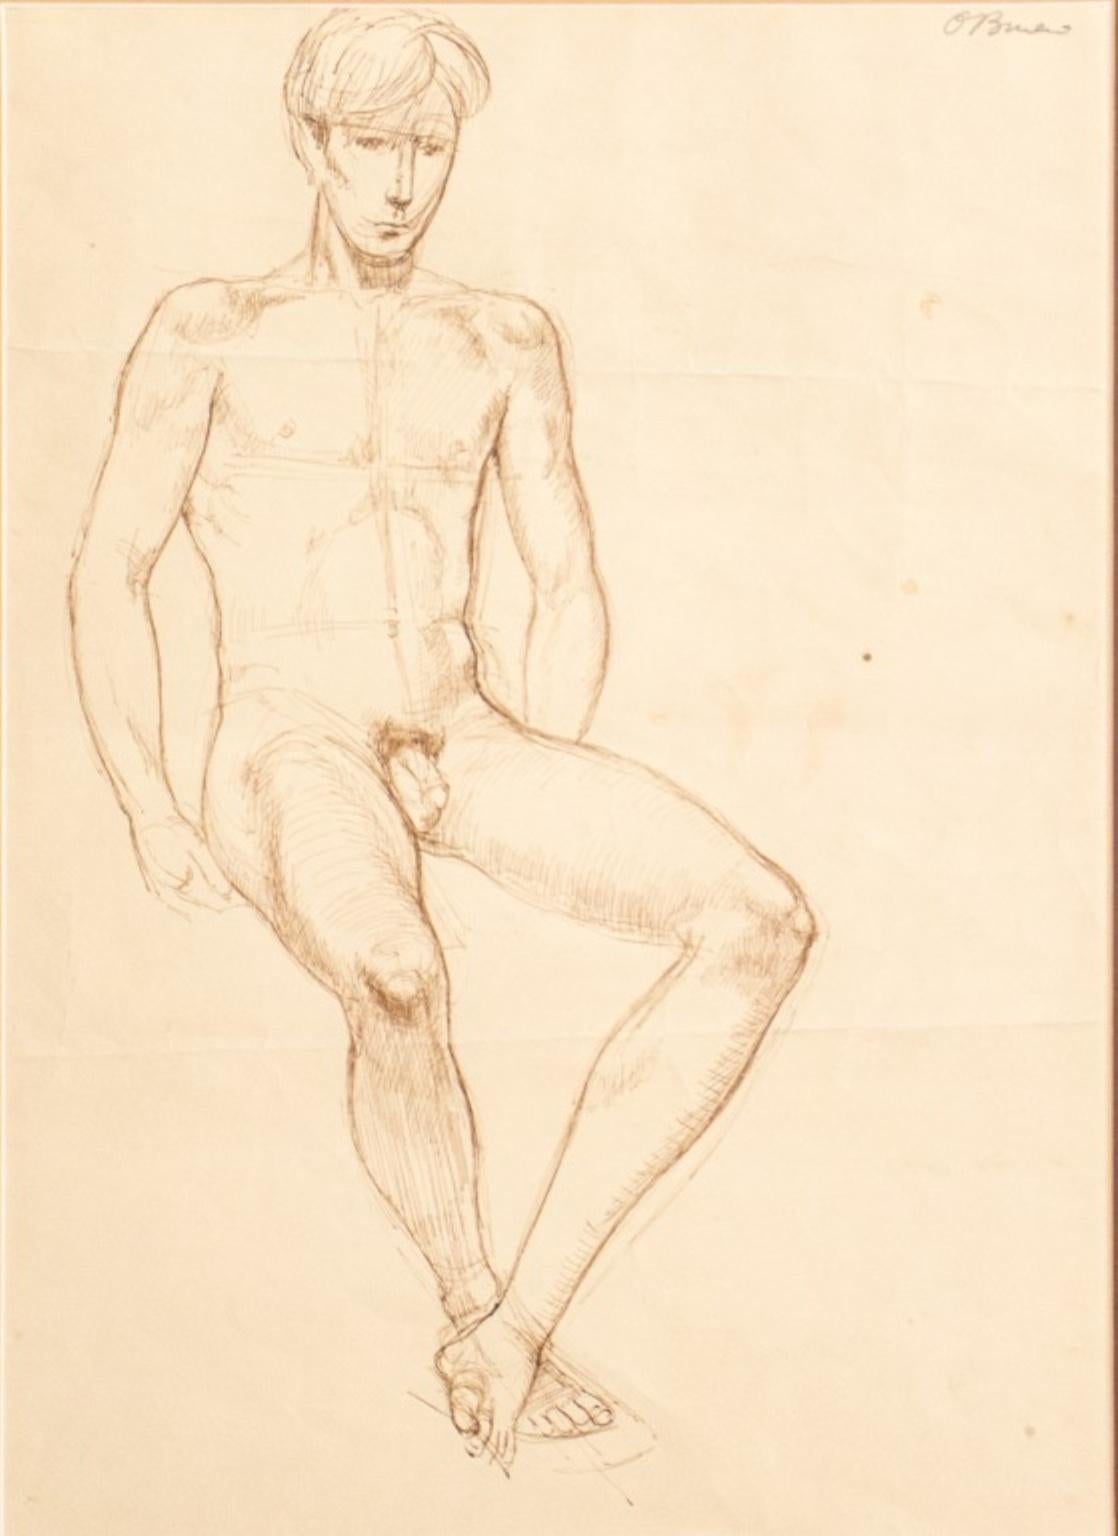 Justin Maurice O'Brien (Australian, 1917-1996) figure study sketch ink on paper drawing depicting a nude man, signed pencil signed upper right, housed under glass in a wood frame. In very good vintage condition.

Dealer: S138XX